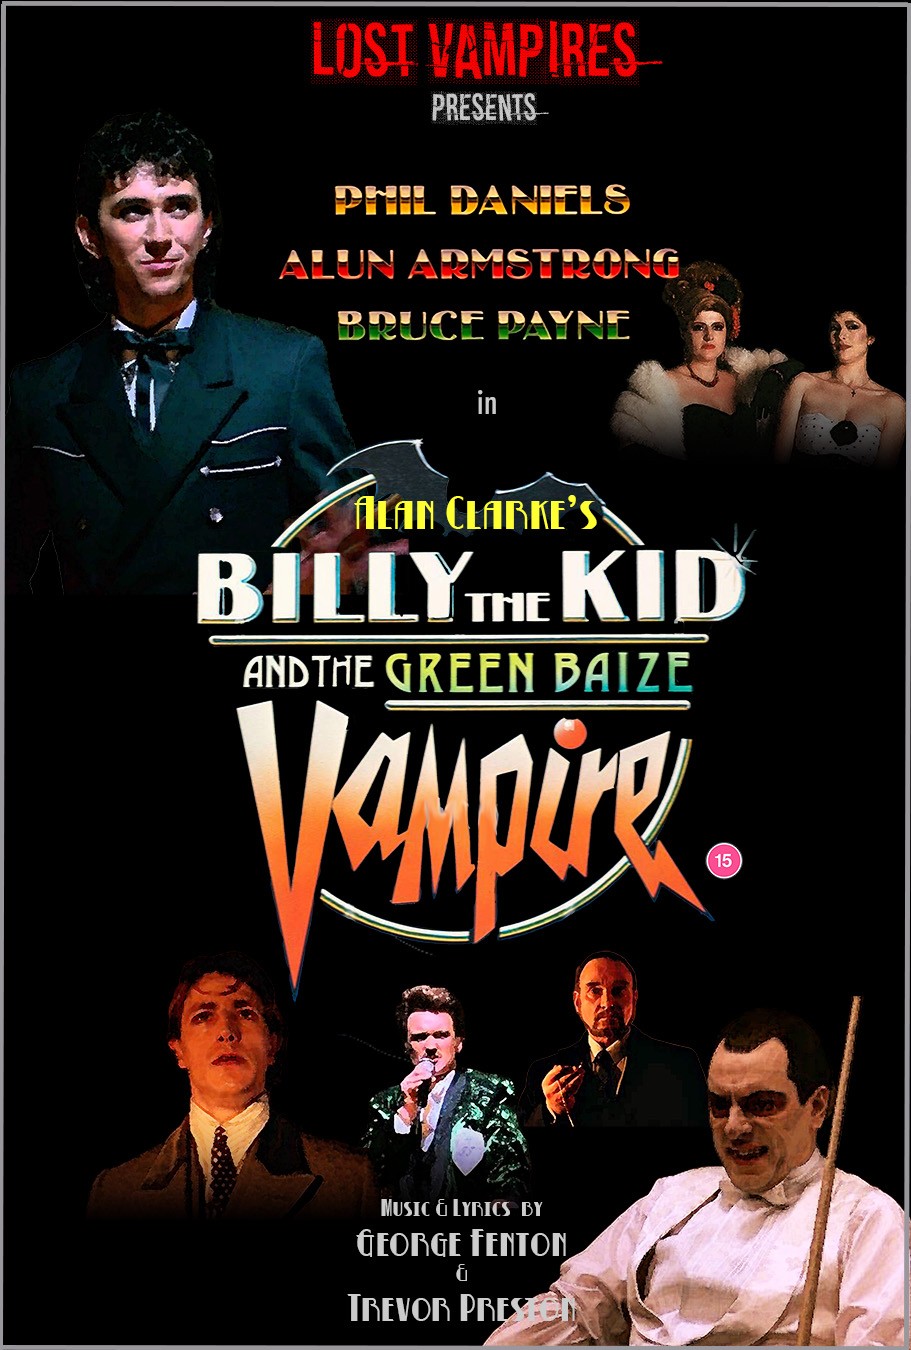 BILLY THE KID AND THE GREEN BAIZE VAMPIRE